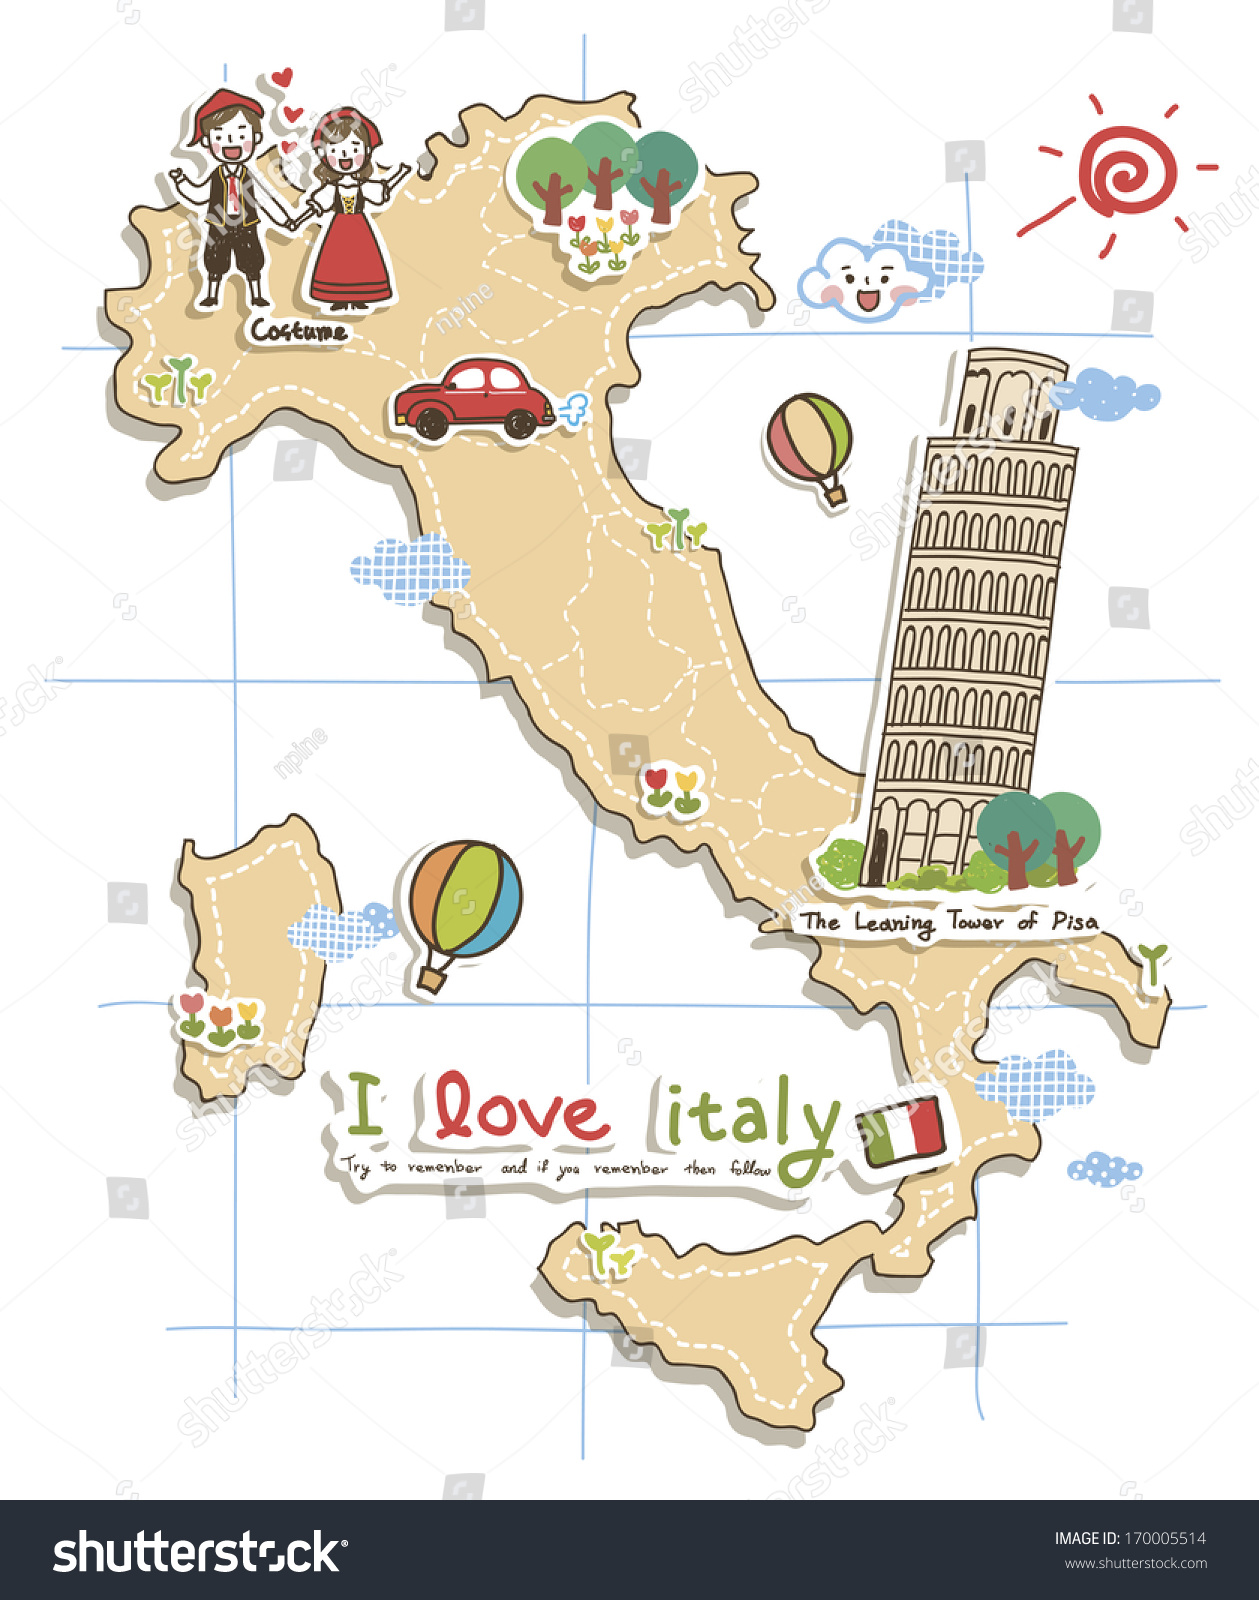 Map Depicting Tourist Attractions In Italy Stock Photo 170005514